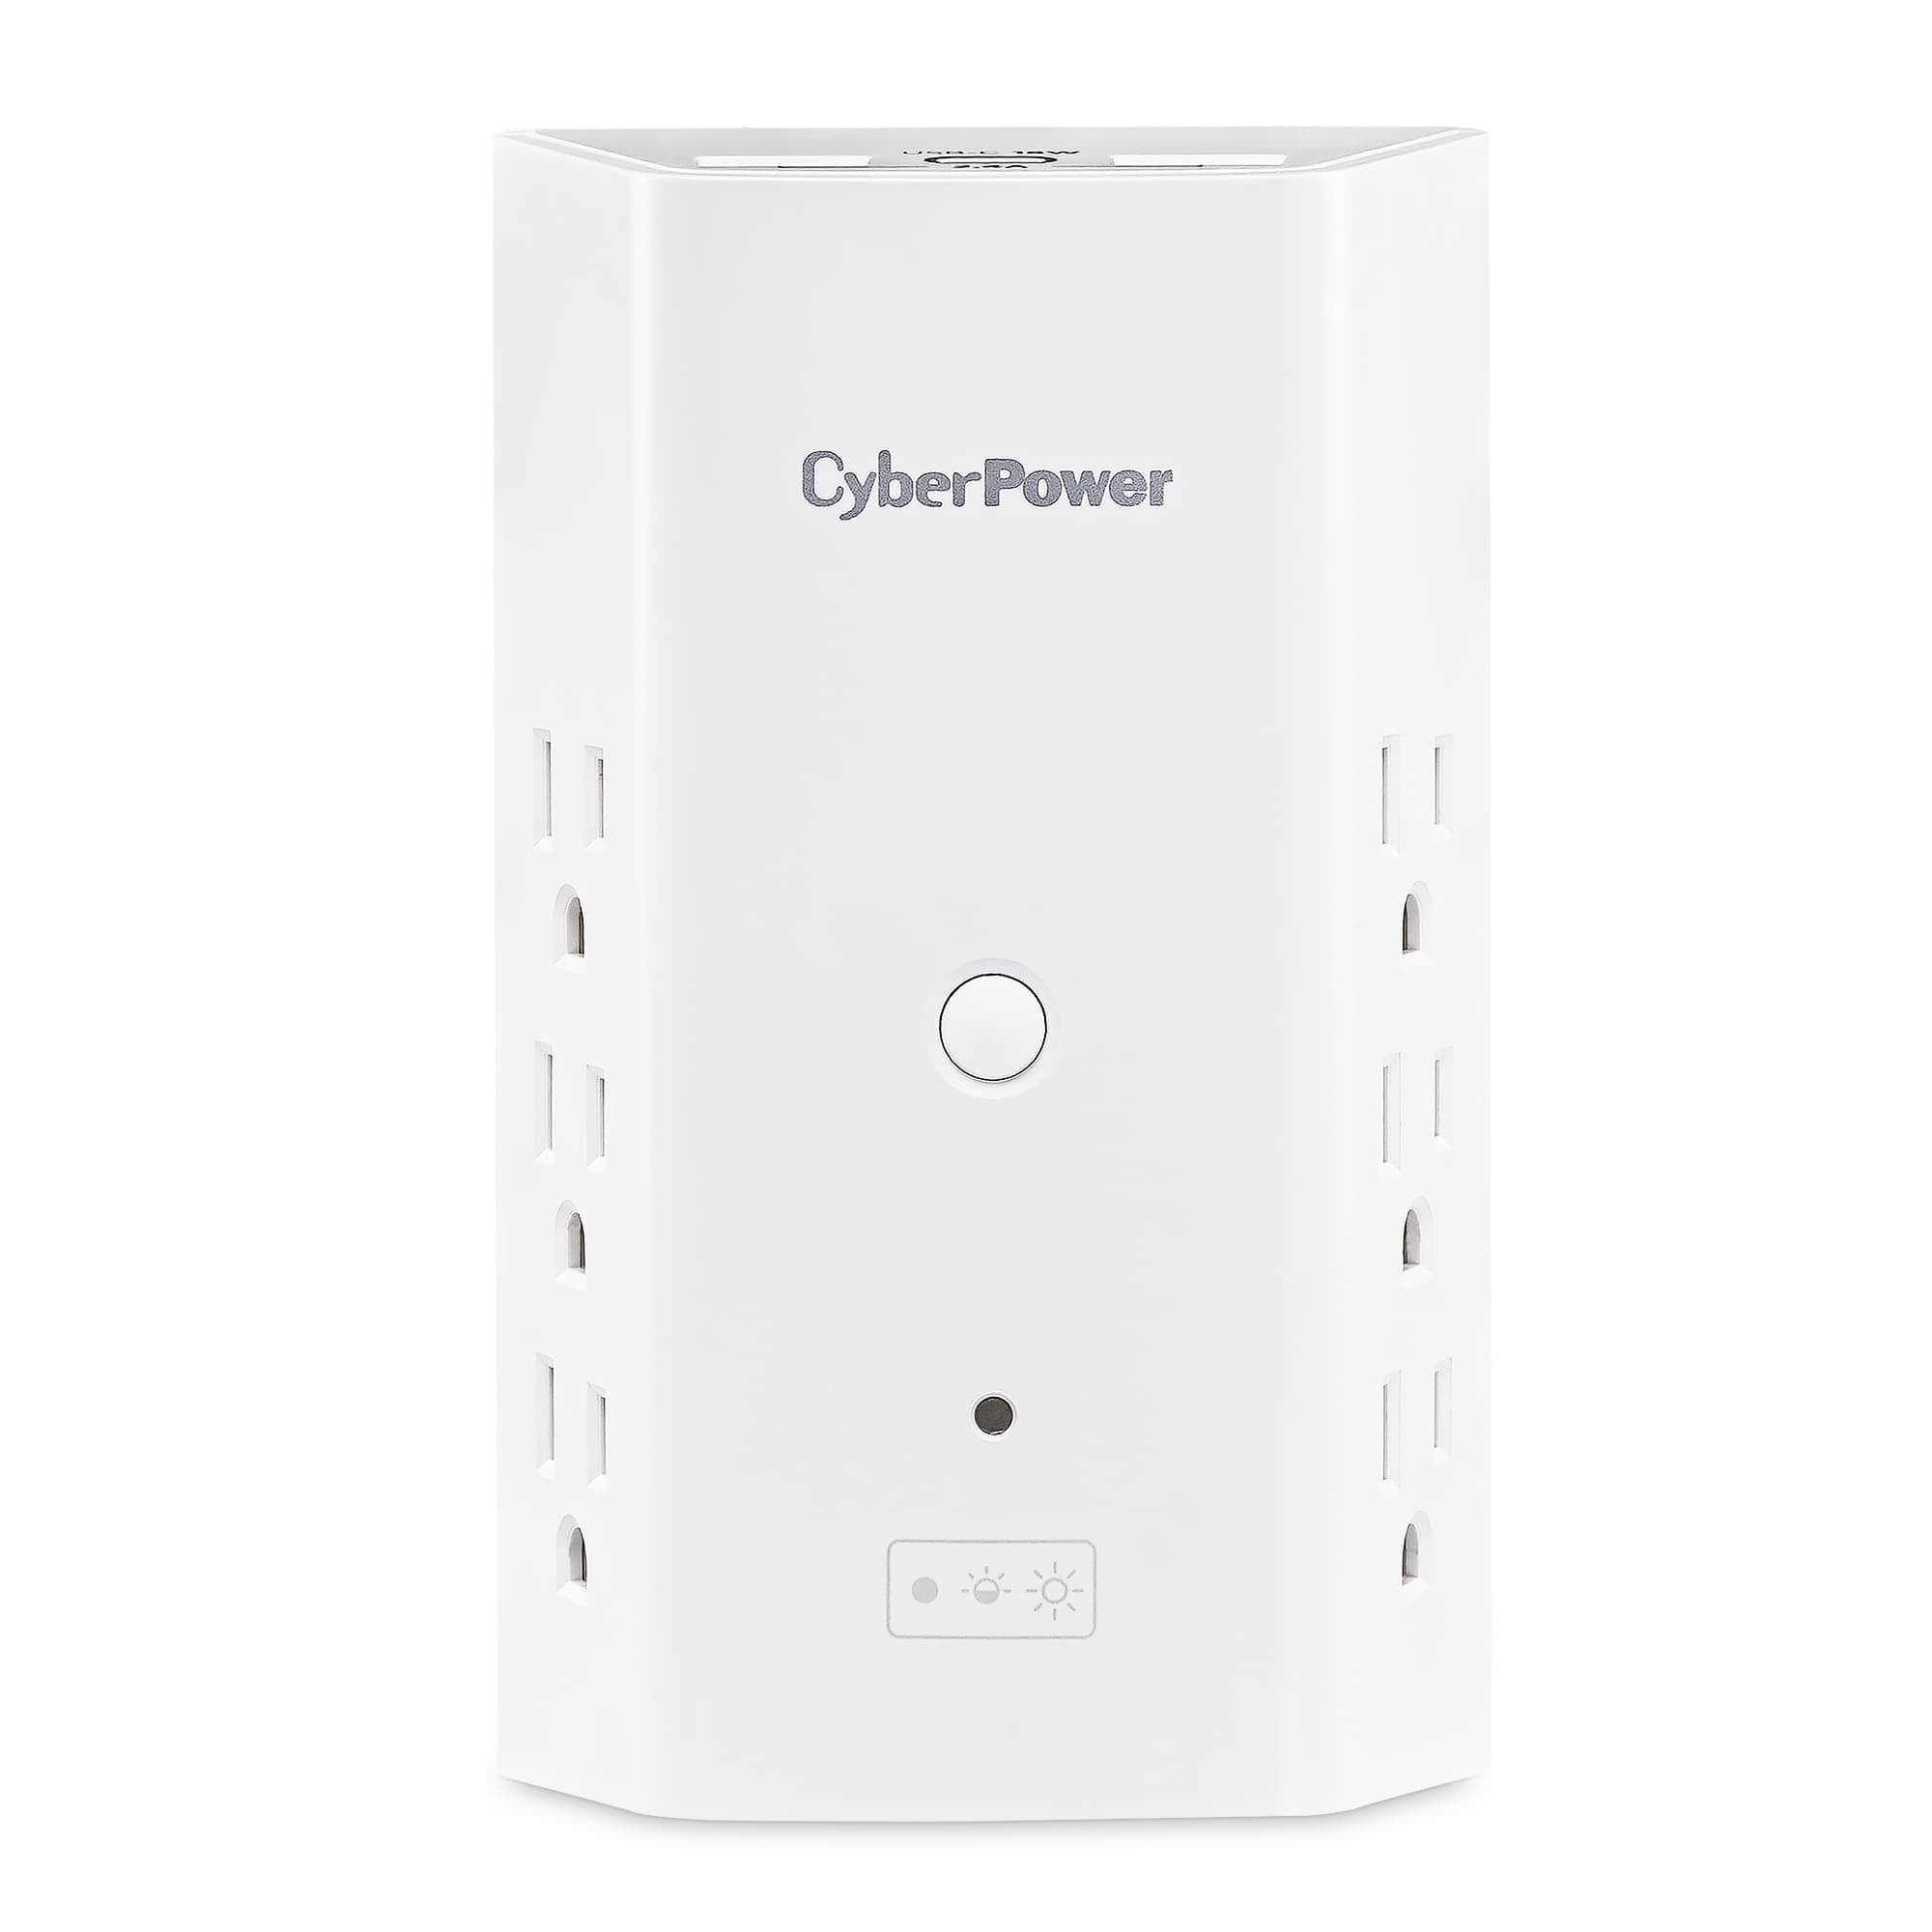 CyberPower P6WUCL - 6 Outlet Surge Protector with 3 USB Ports